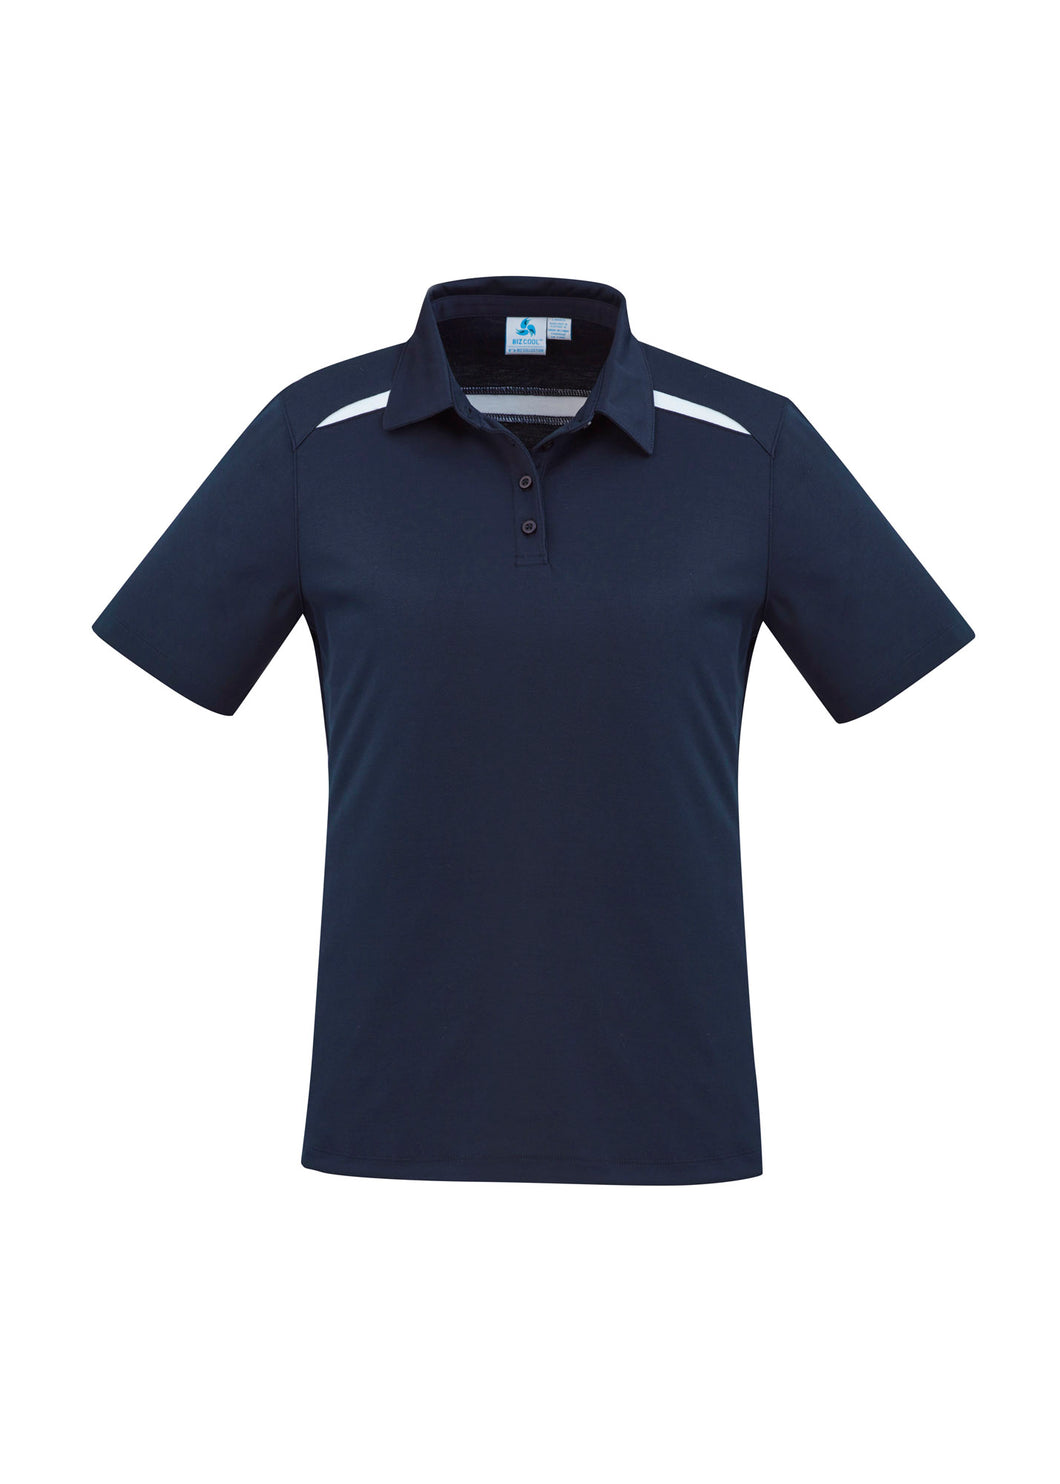 Ladies Cotton-Backed Contrast Polo - Navy/White